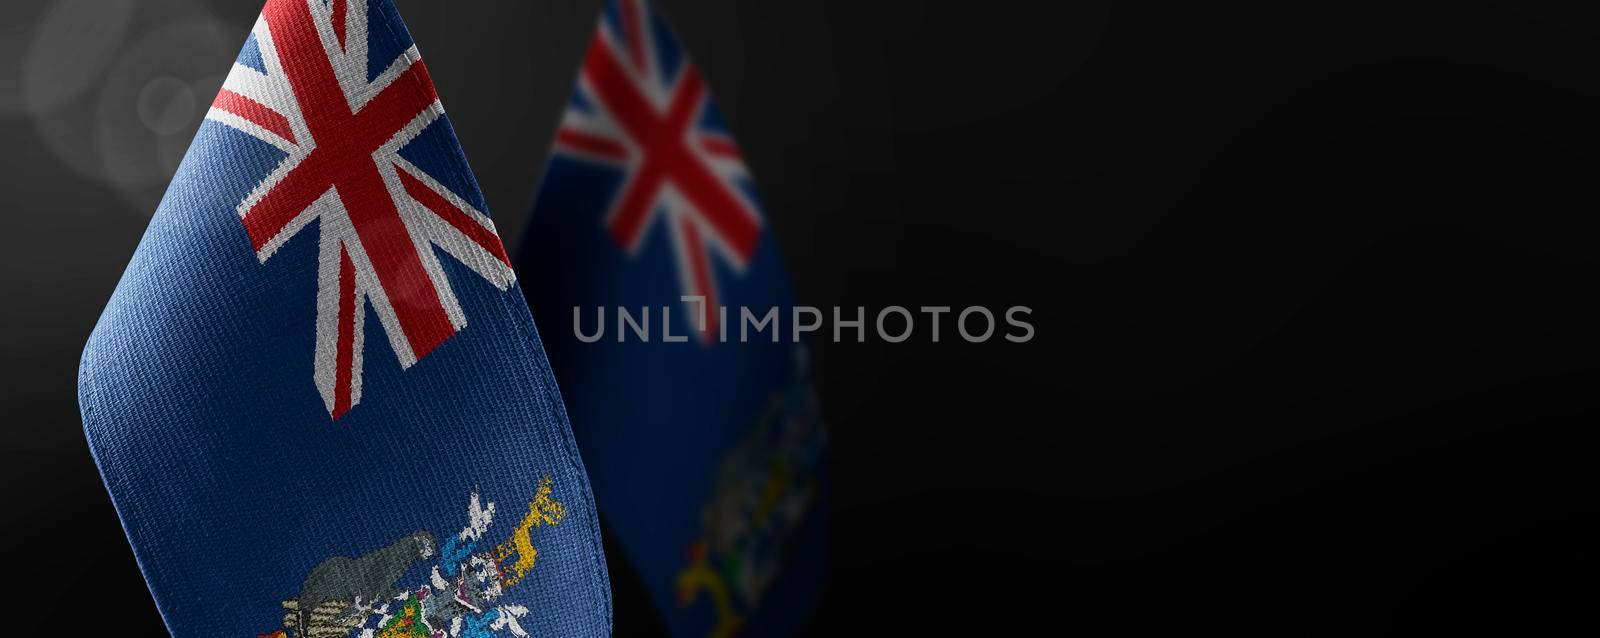 Small national flags of the South Georgia and the South Sandwich Islands on a dark background by butenkow